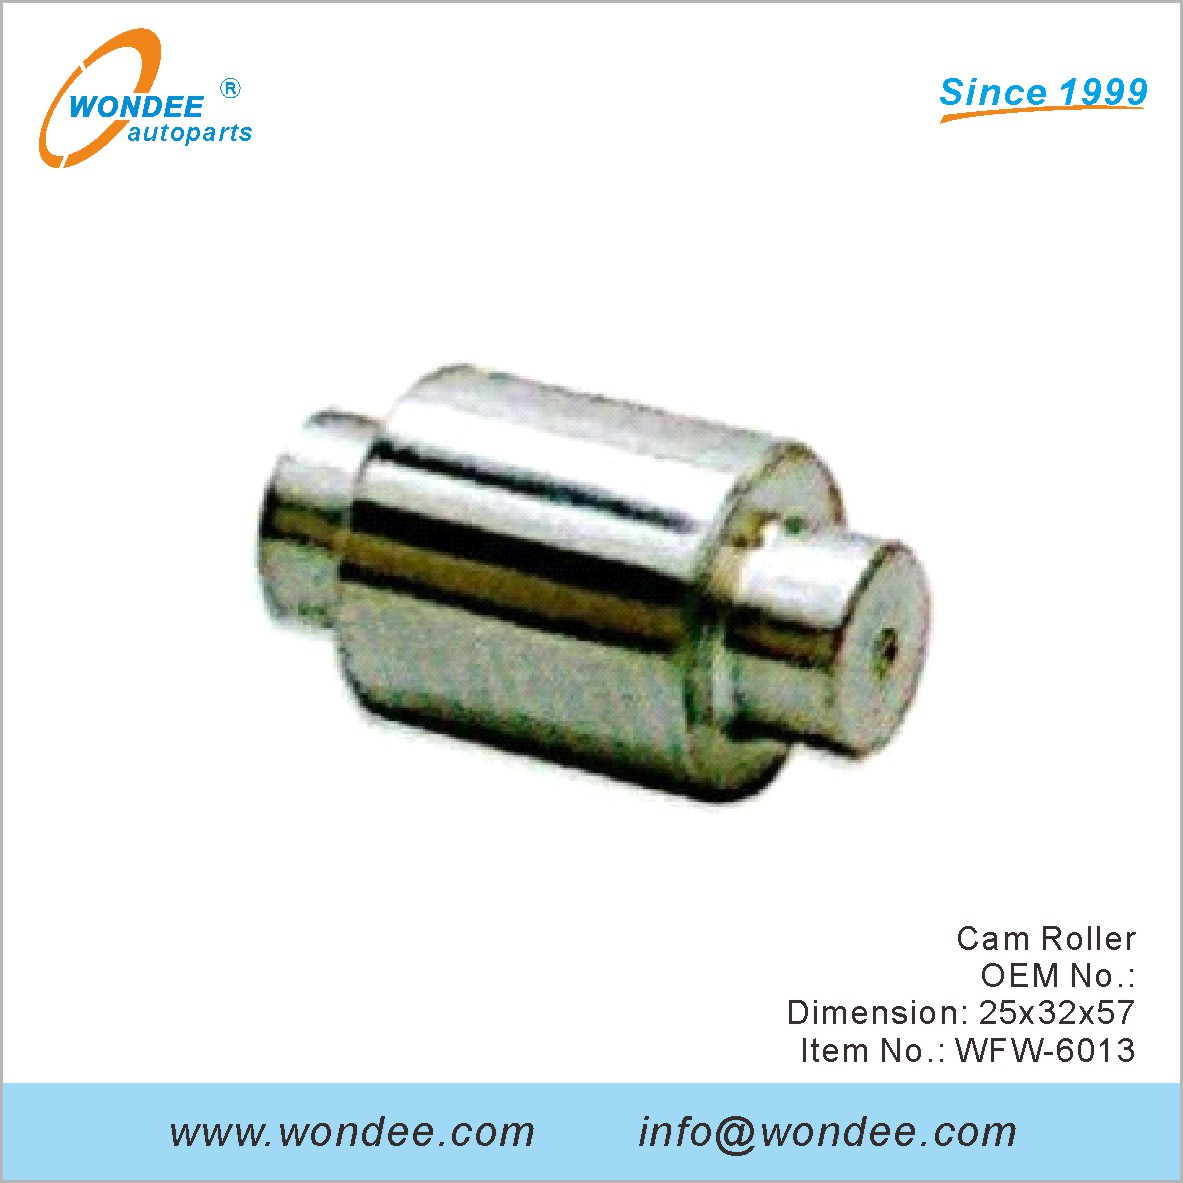 Cam Roller OEM for FUWA from WONDEE